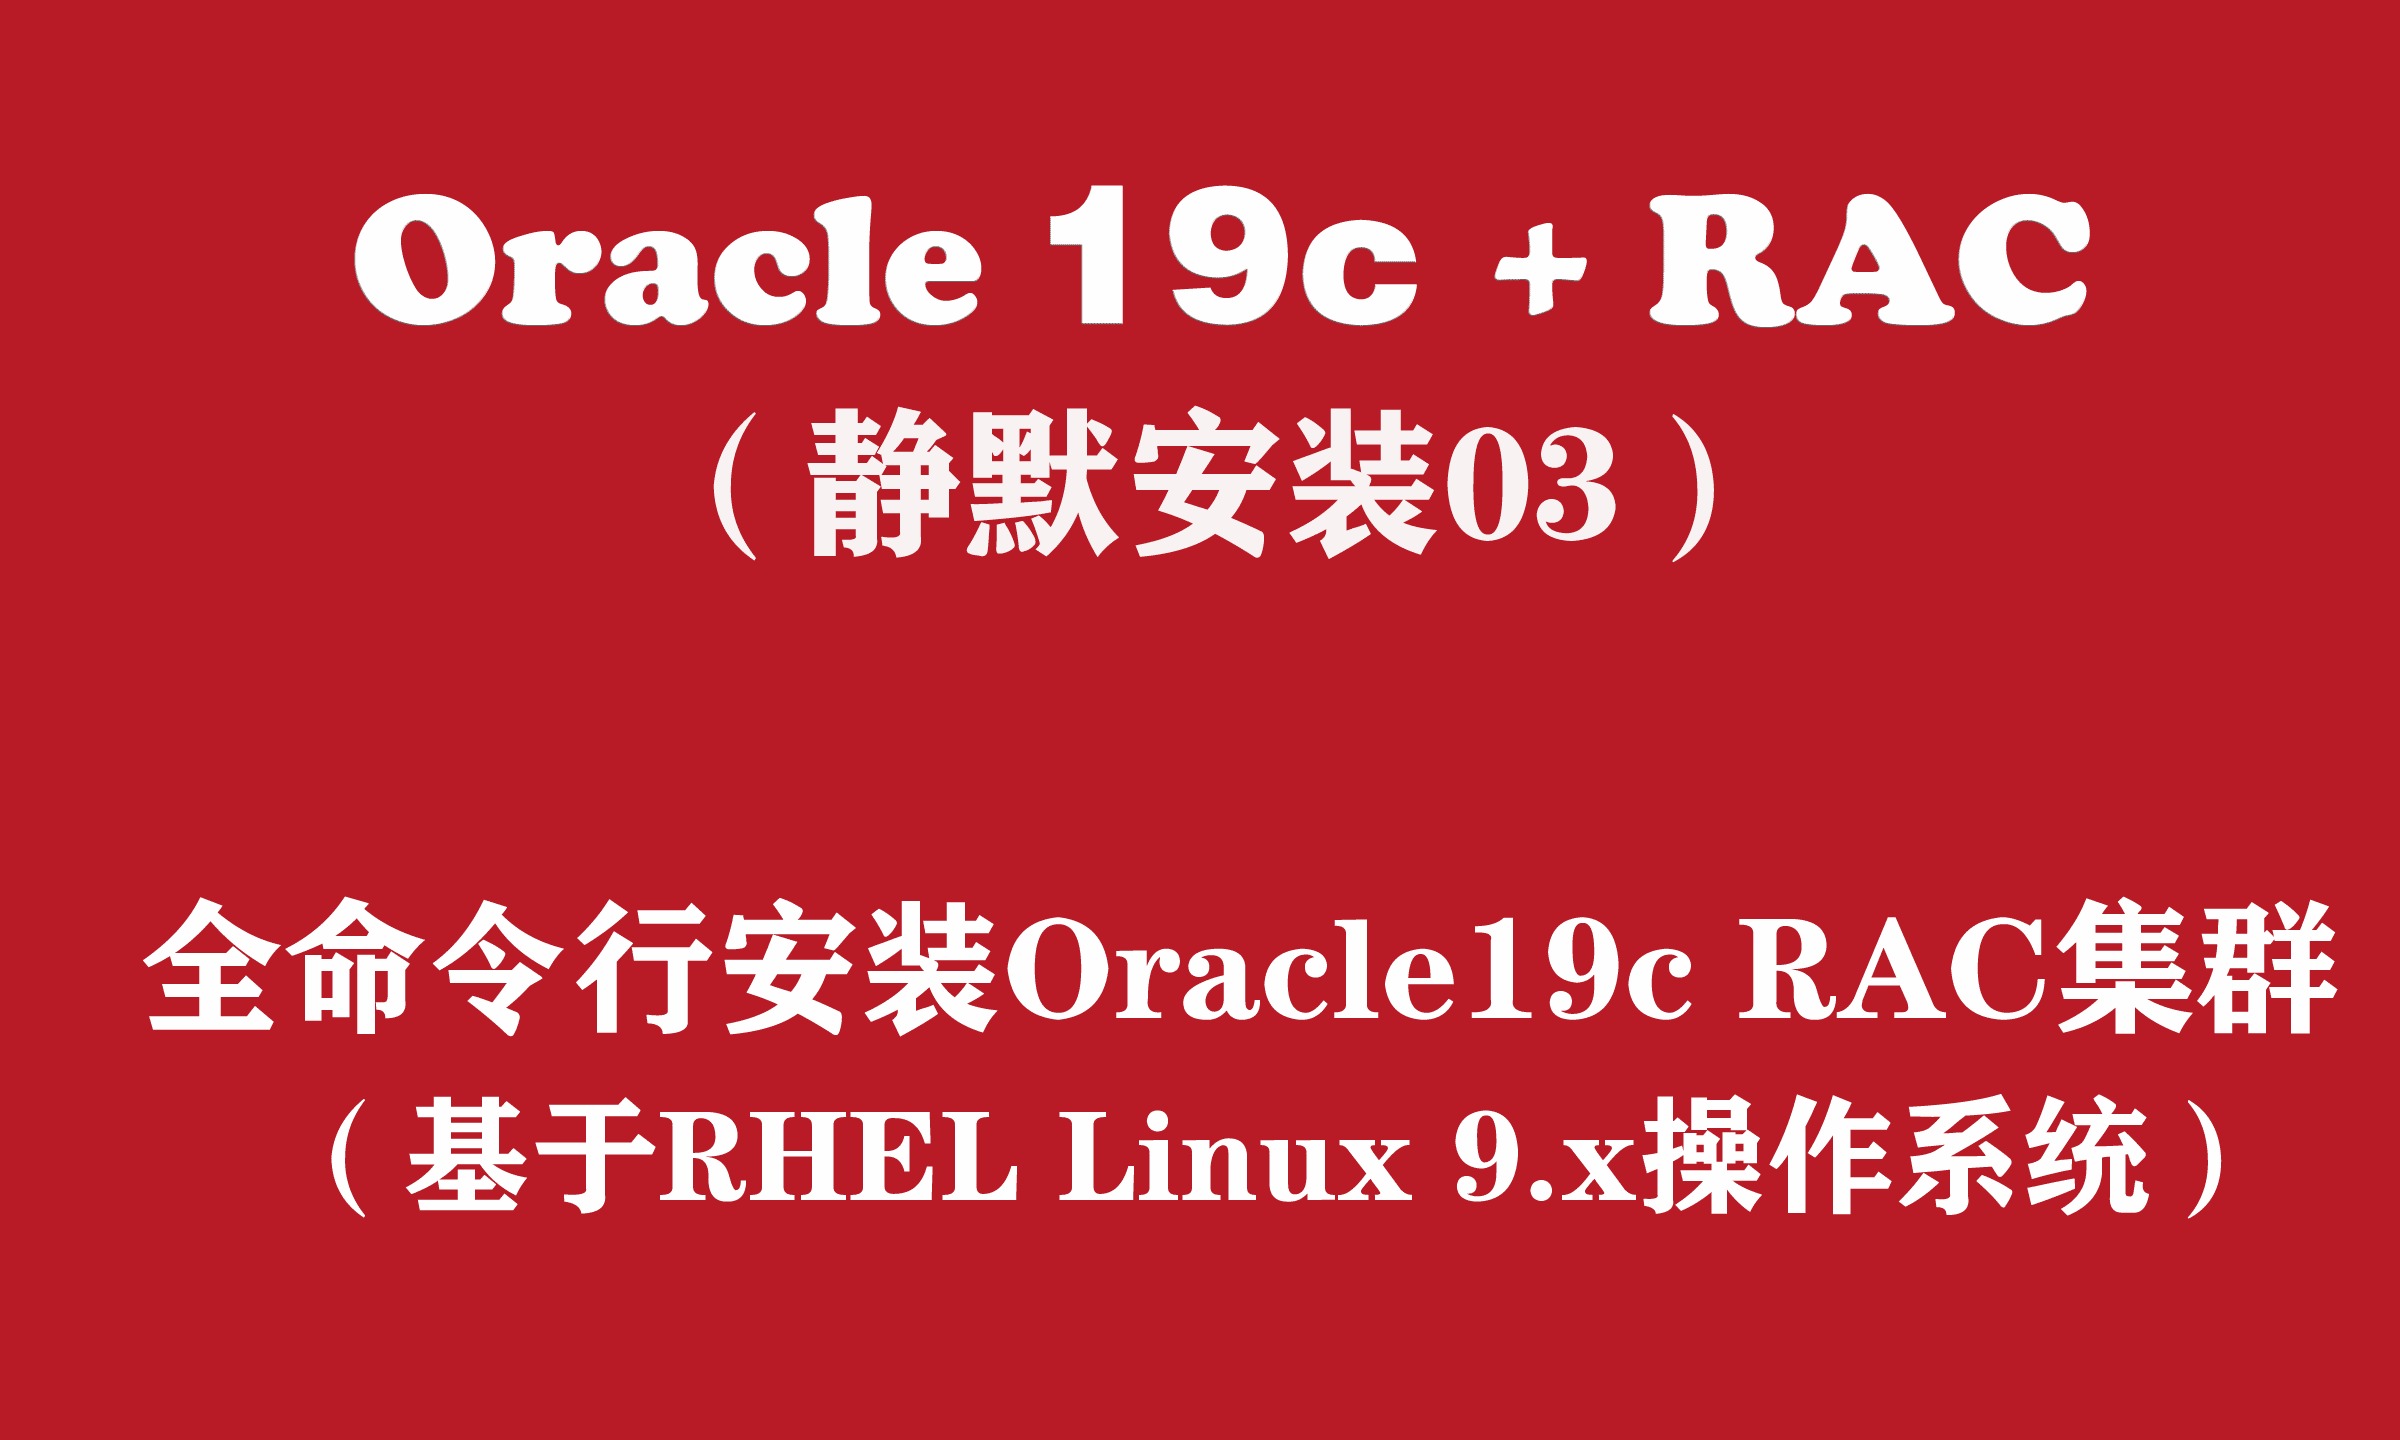  Oracle+RAC silent installation series (03): full command line installation of Oracle 19c RAC for RHEL9